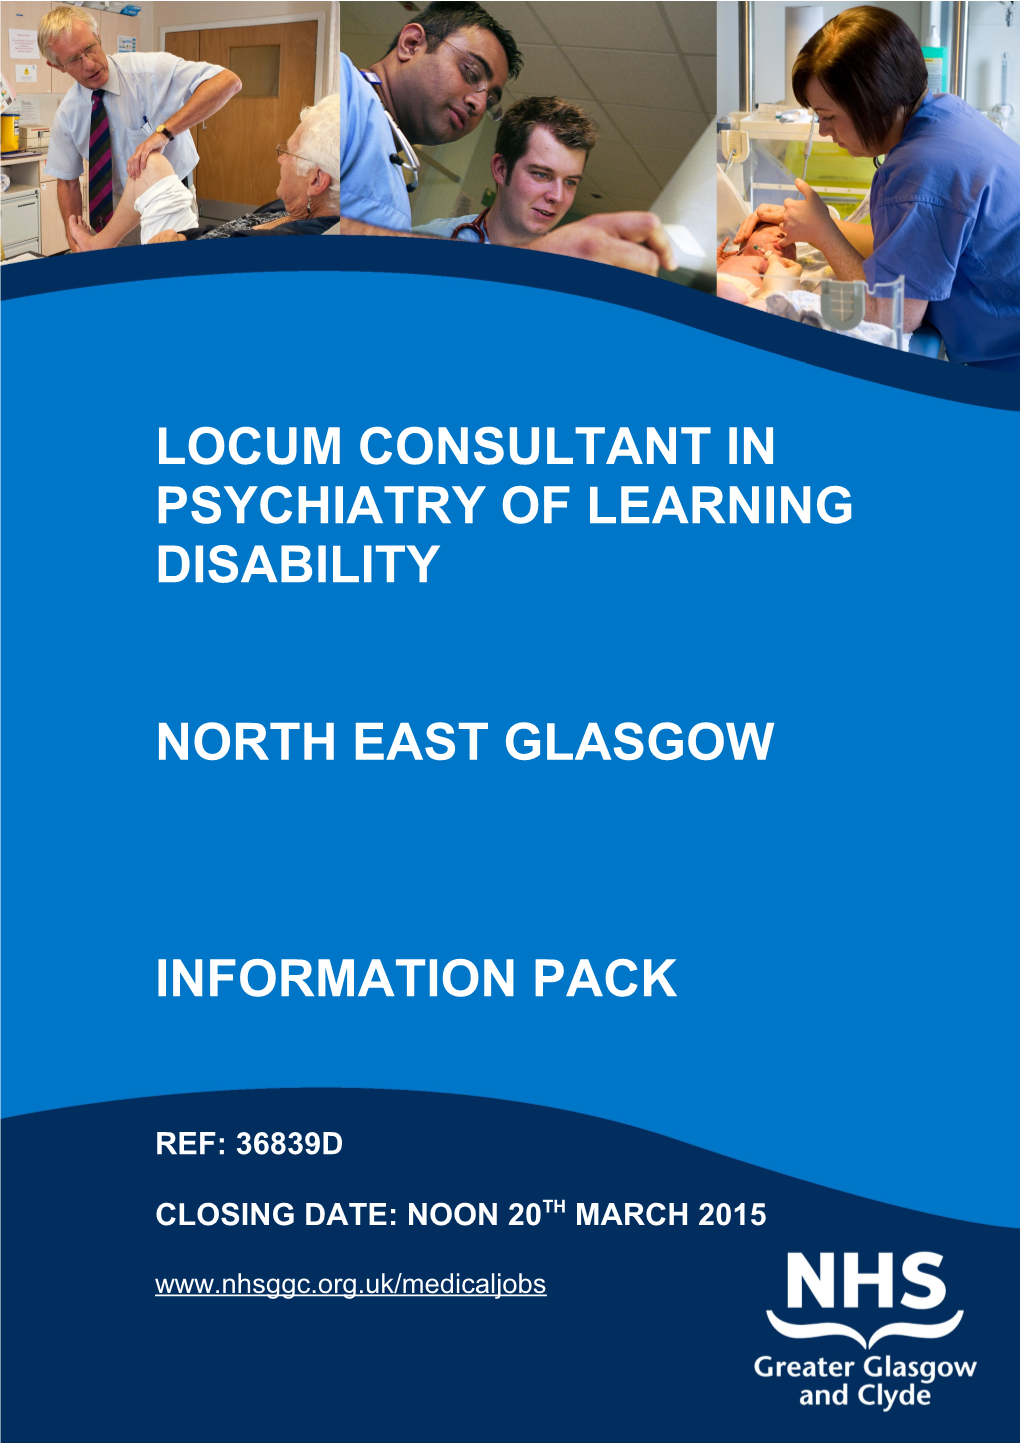 Locum Consultant in Psychiatry of Learning Disability